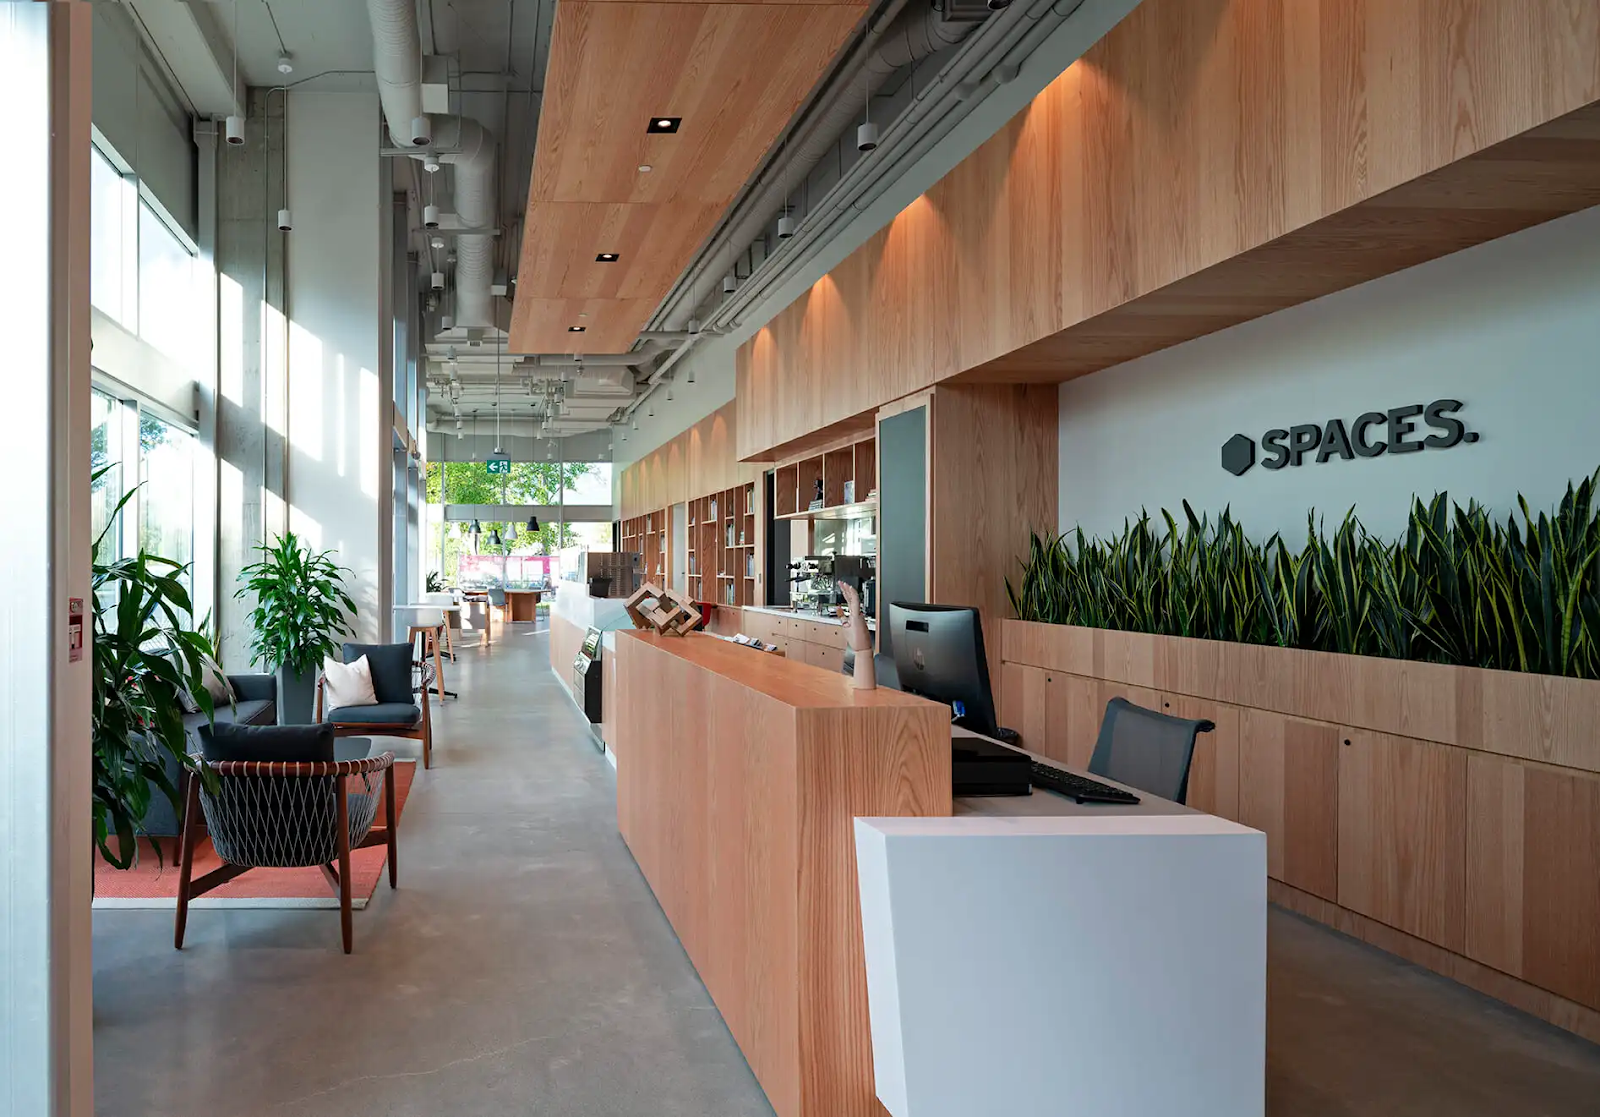 the entrance area of Spaces, a co-working lab in Kelowna